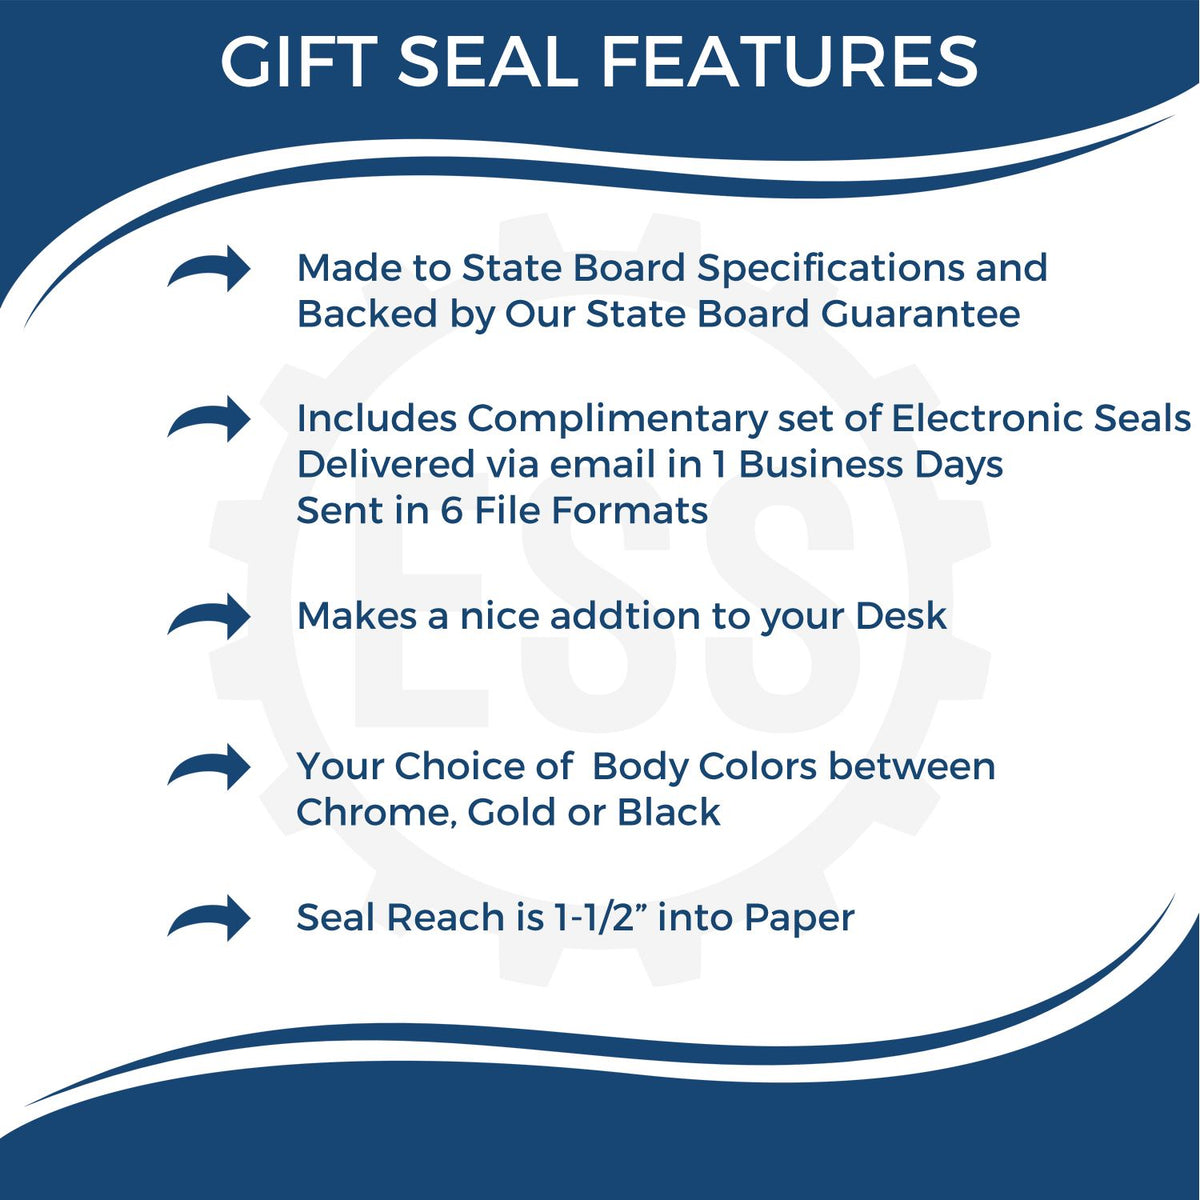 A picture of an infographic highlighting the selling points for the Gift Utah Engineer Seal